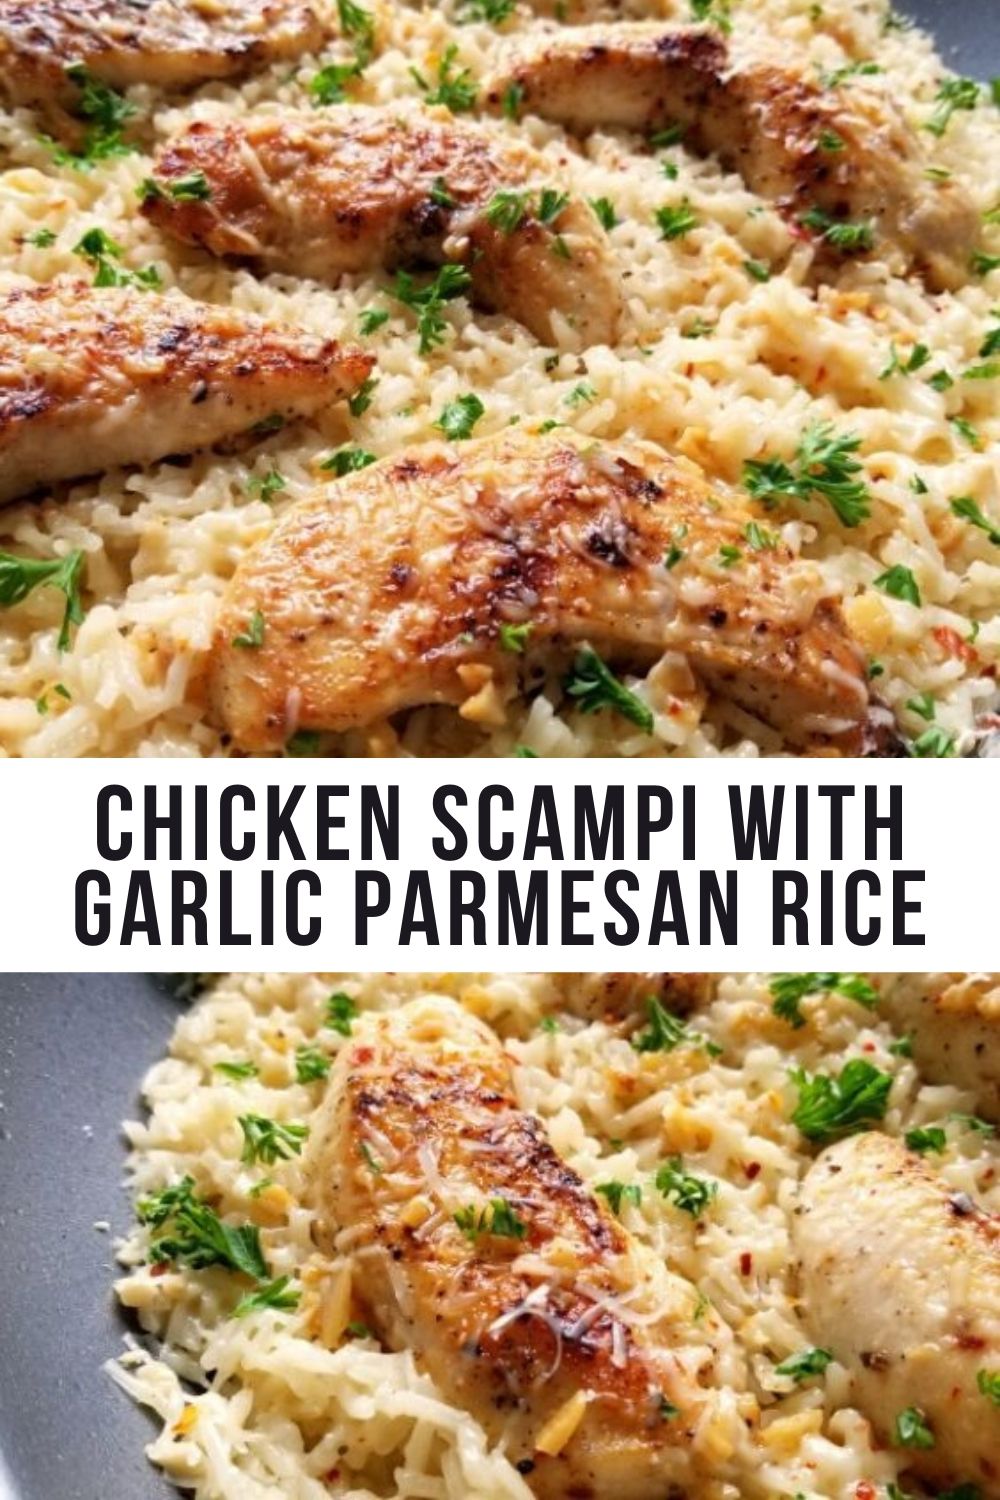 Chicken Scampi with Garlic Parmesan Rice - Pinnerfood